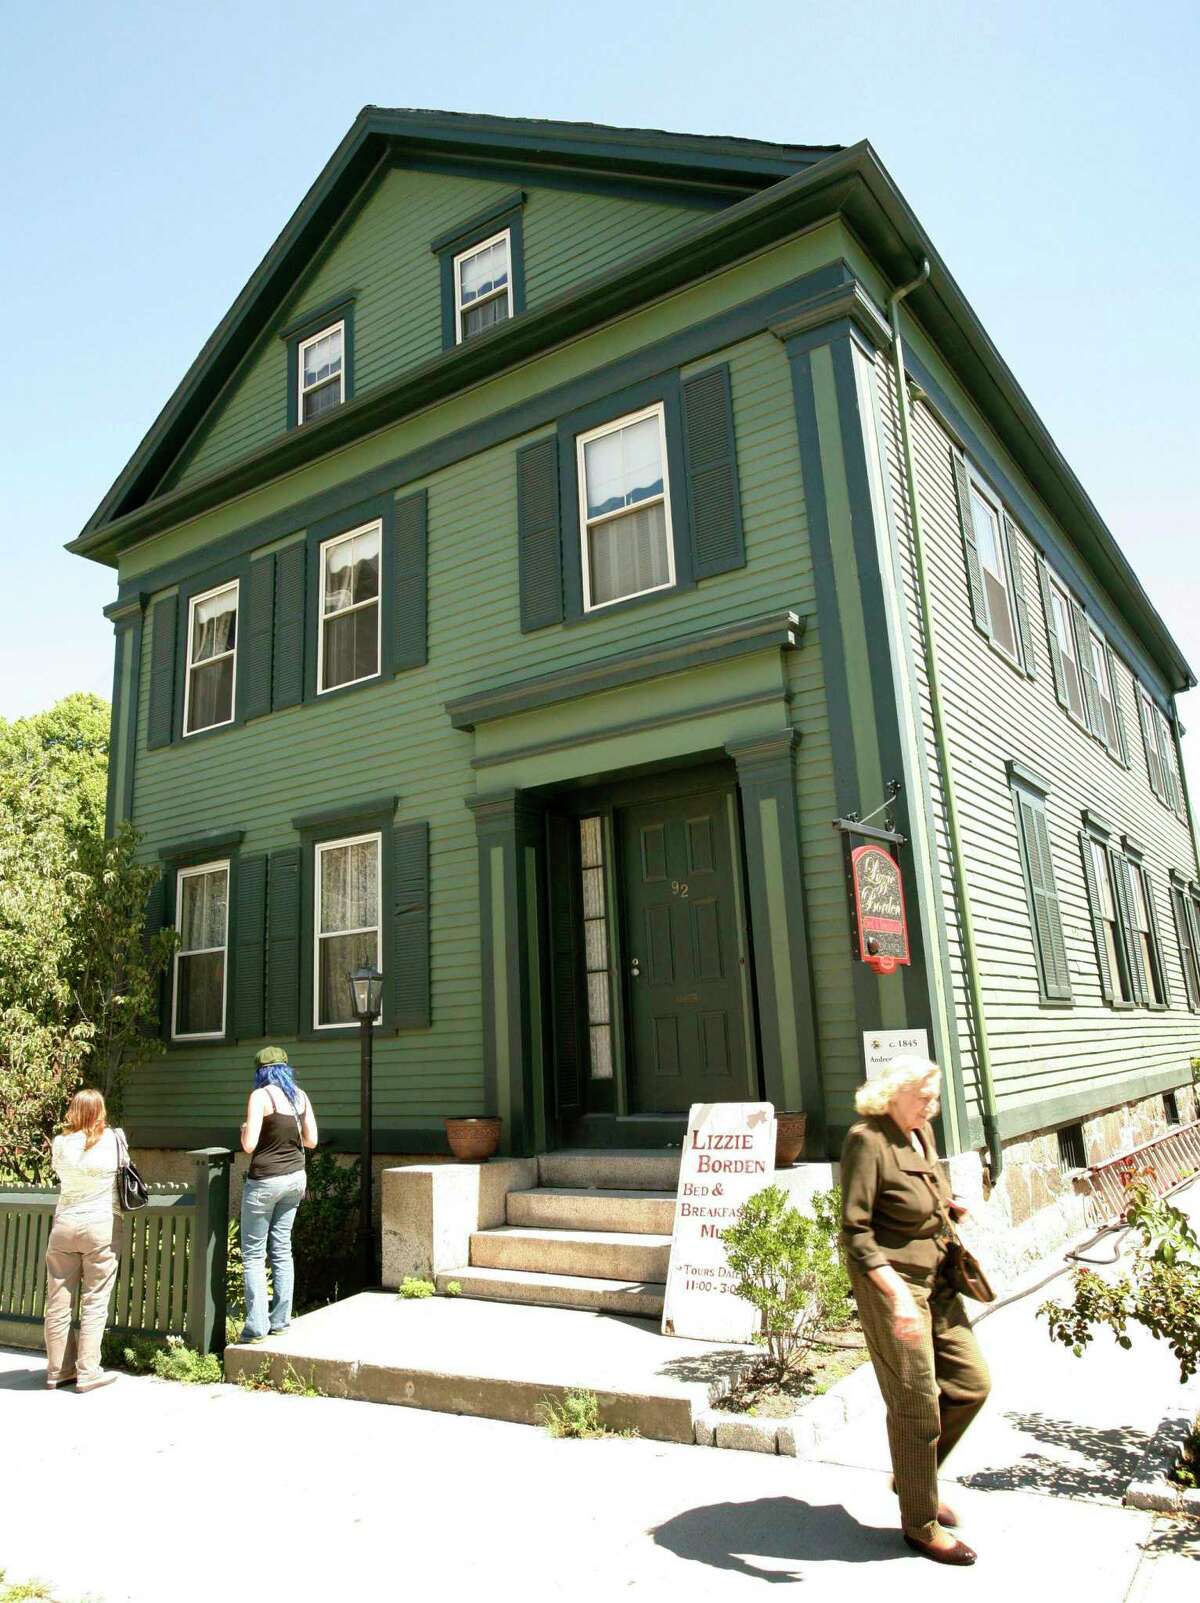 In this Aug. 20, 2008 photo, passers-by walk in front of the Lizzie Borden Bed and Breakfast, in Fall River, Mass.